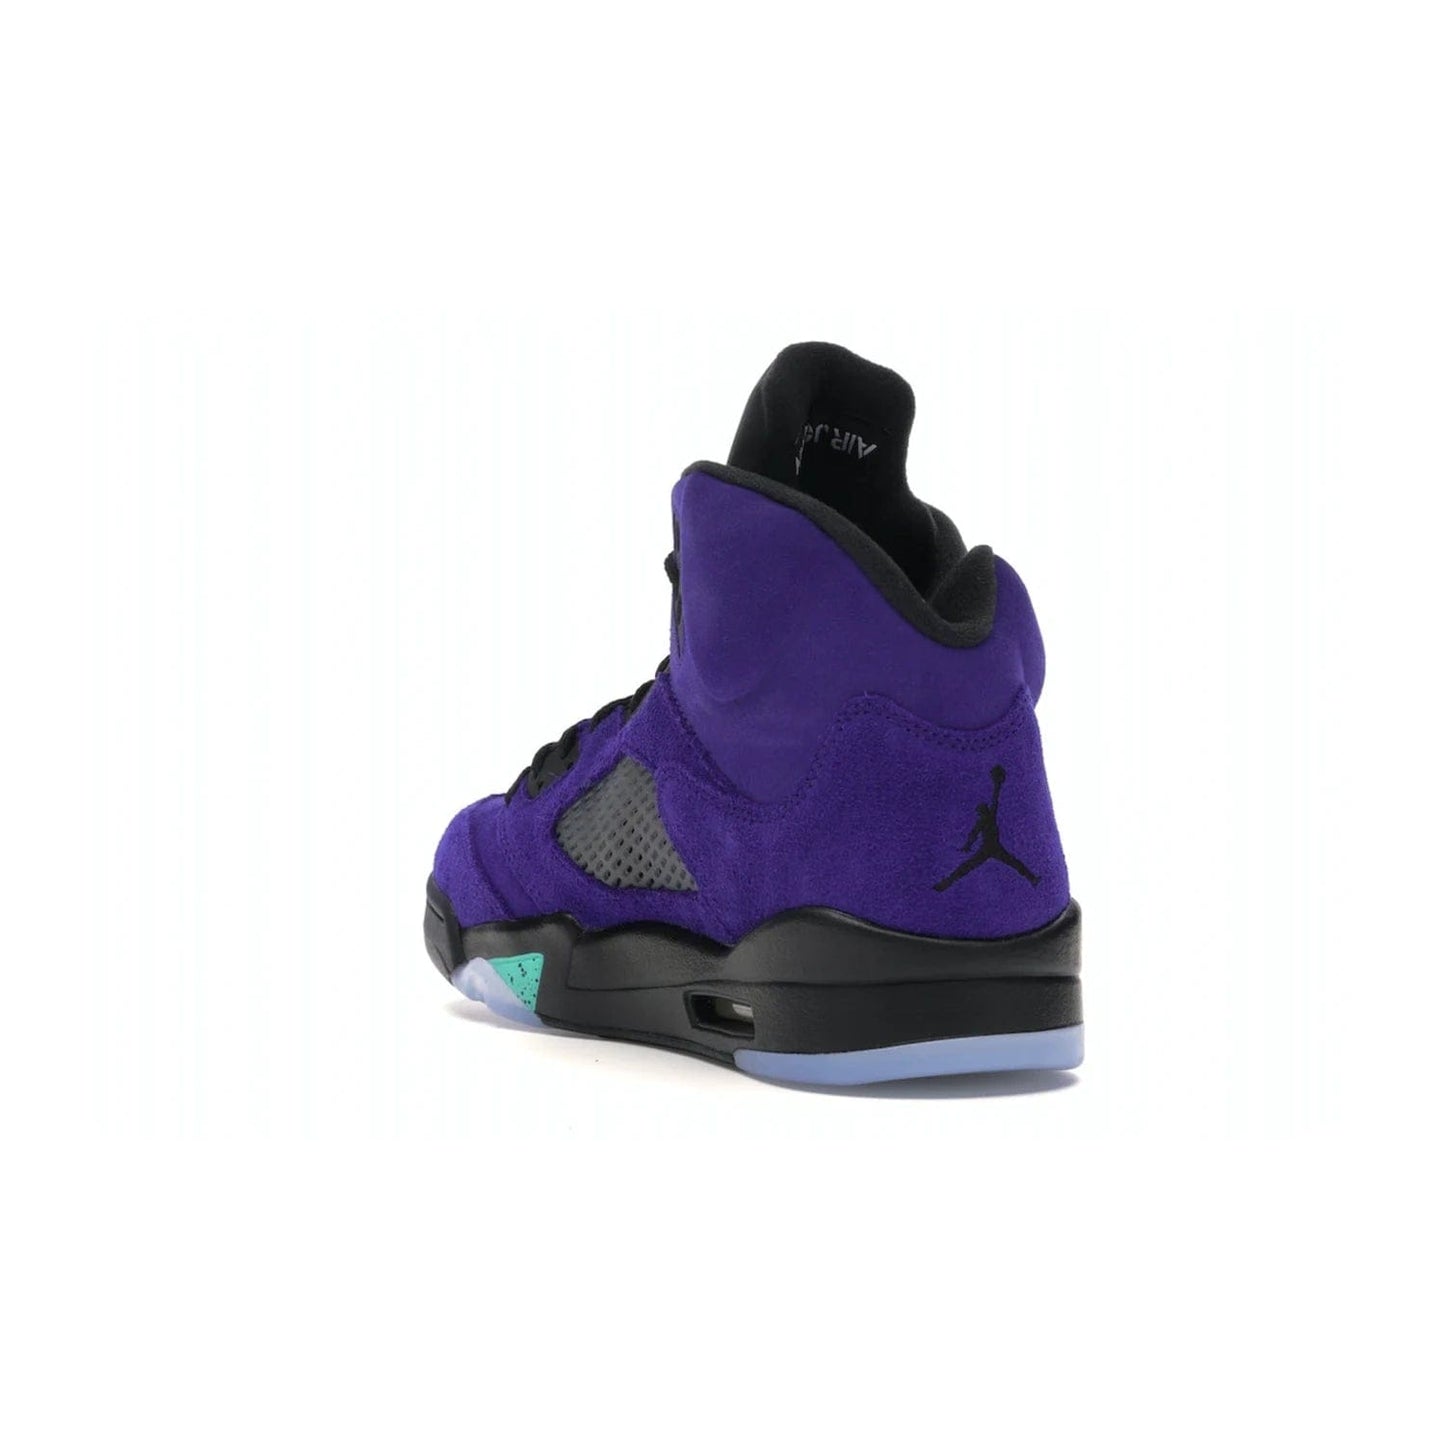 Jordan 5 Retro Alternate Grape - Image 25 - Only at www.BallersClubKickz.com - Bring the classic Jordan 5 Retro Alternate Grape to your sneaker collection! Featuring a purple suede upper, charcoal underlays, green detailing, and an icy and green outsole. Releasing for the first time since 1990, don't miss this chance to add a piece of sneaker history to your collection.